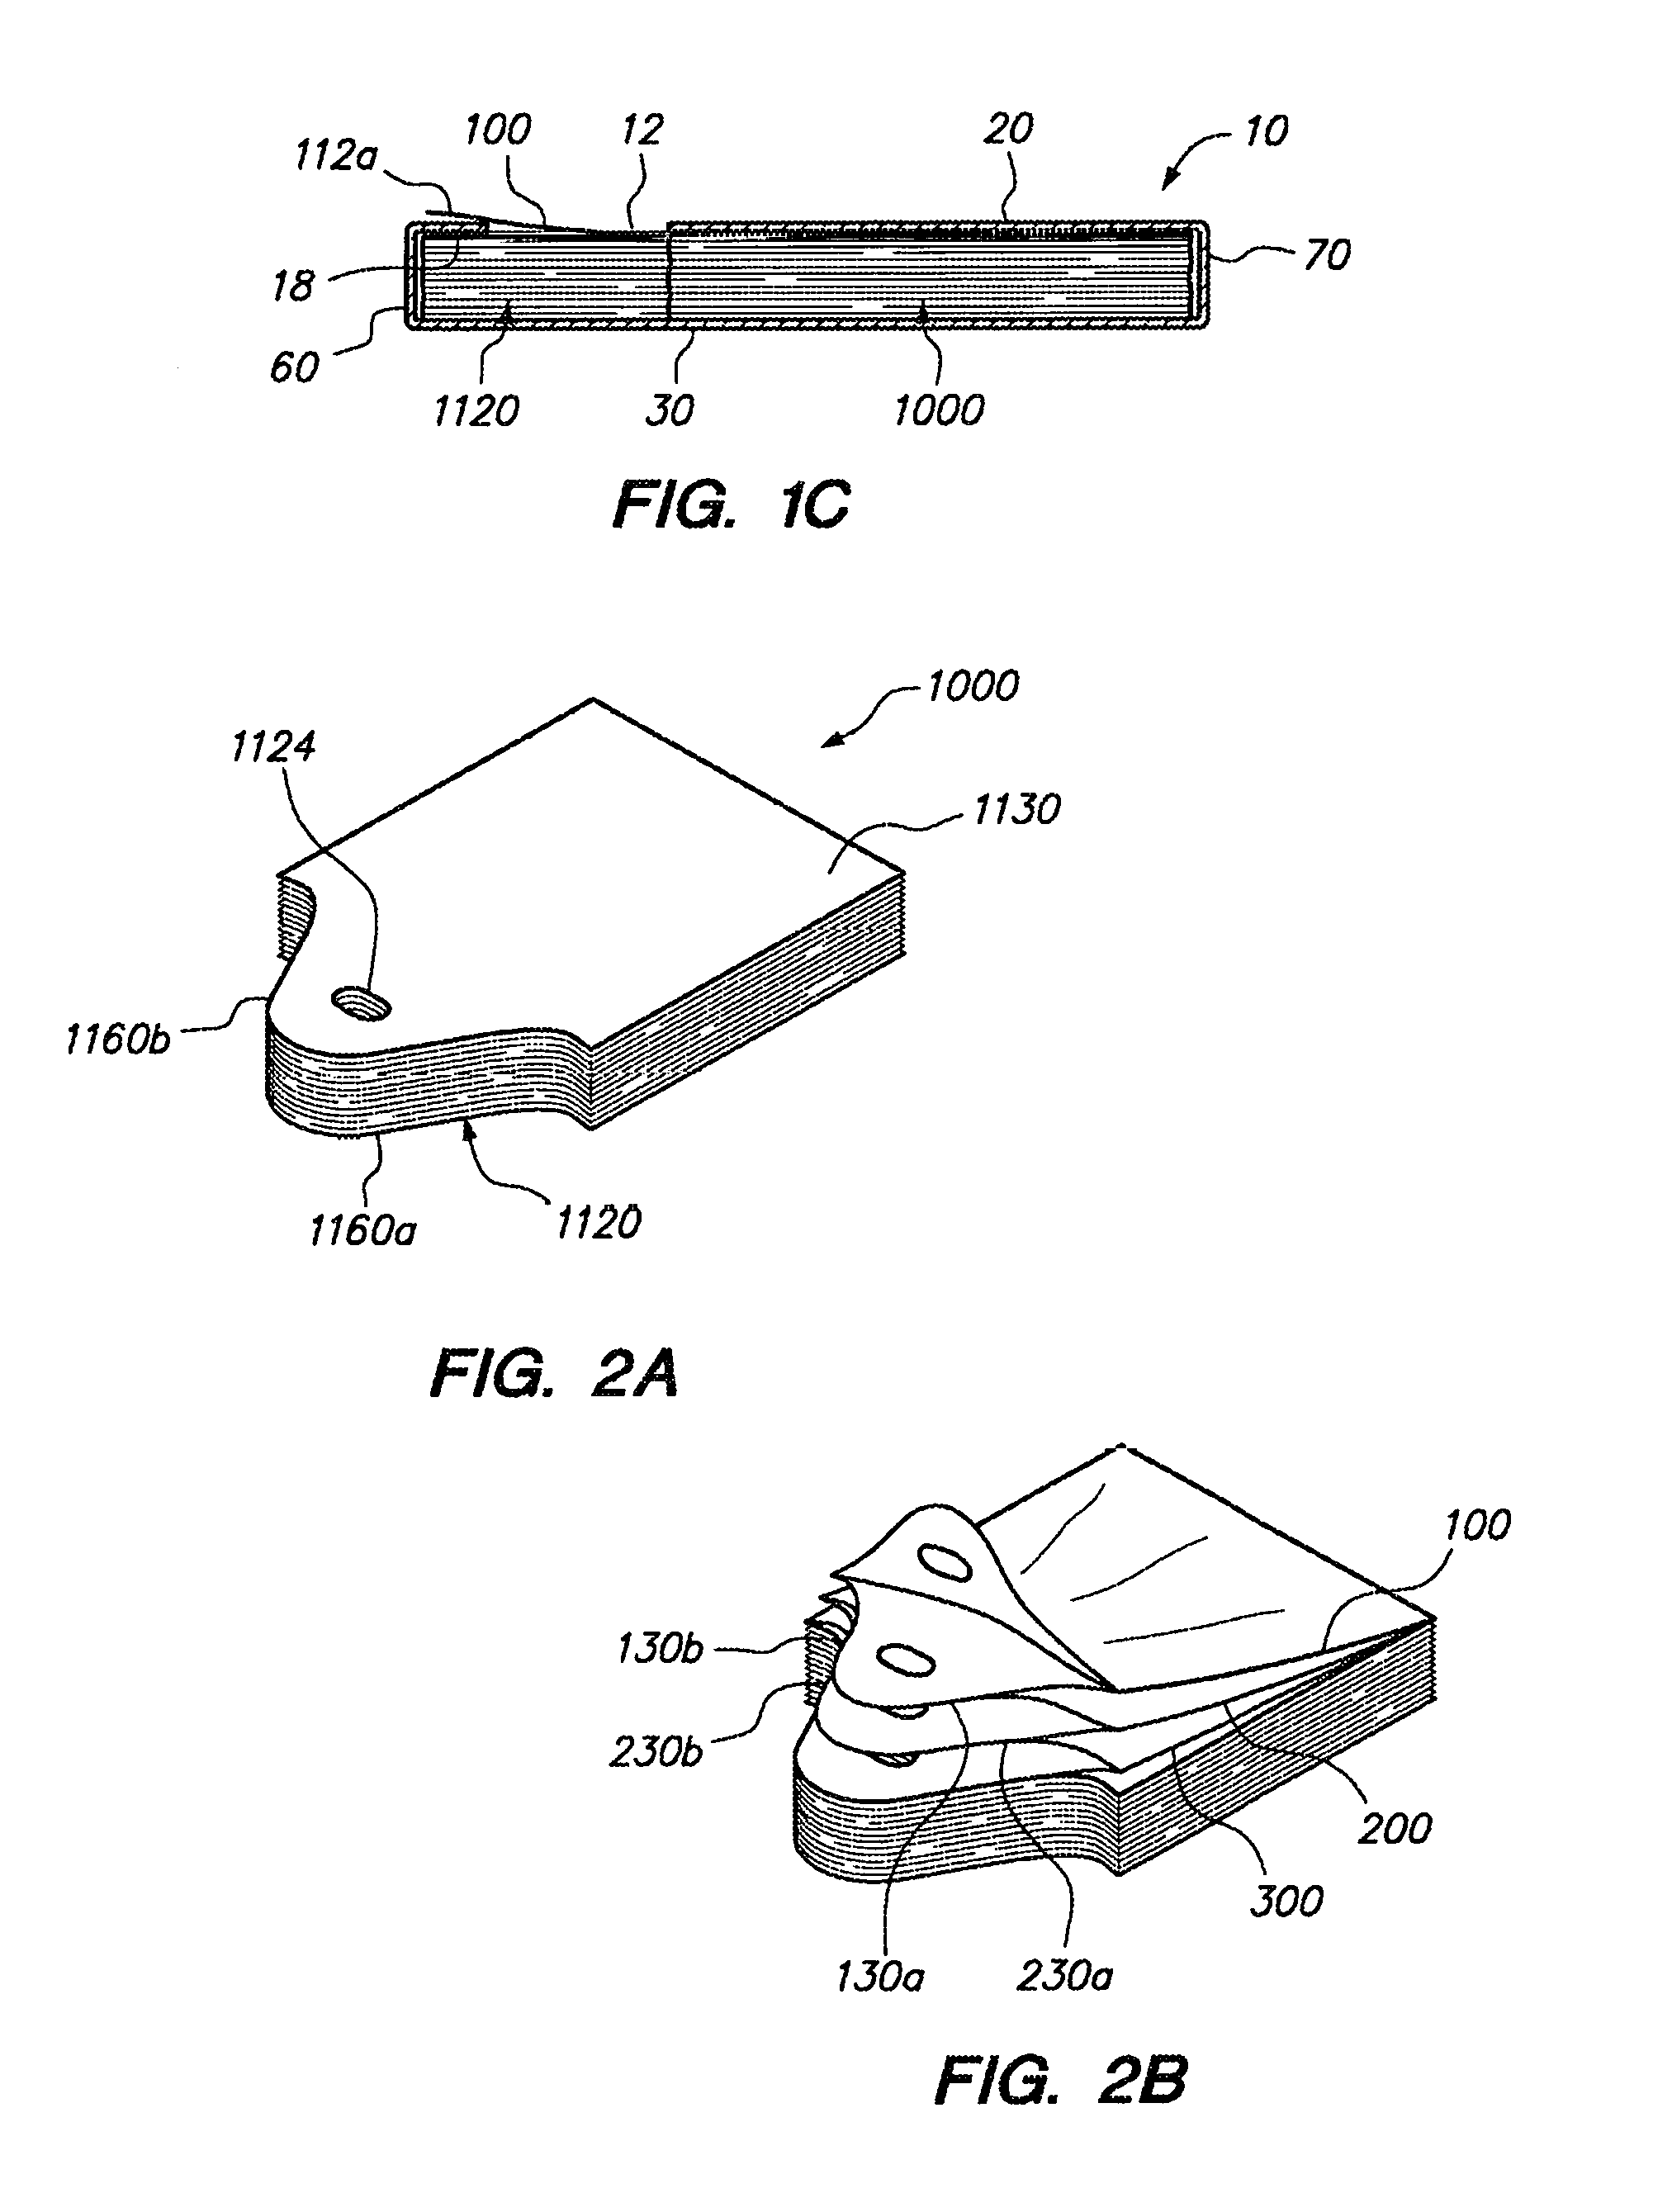 Article dispenser and methods relating to same